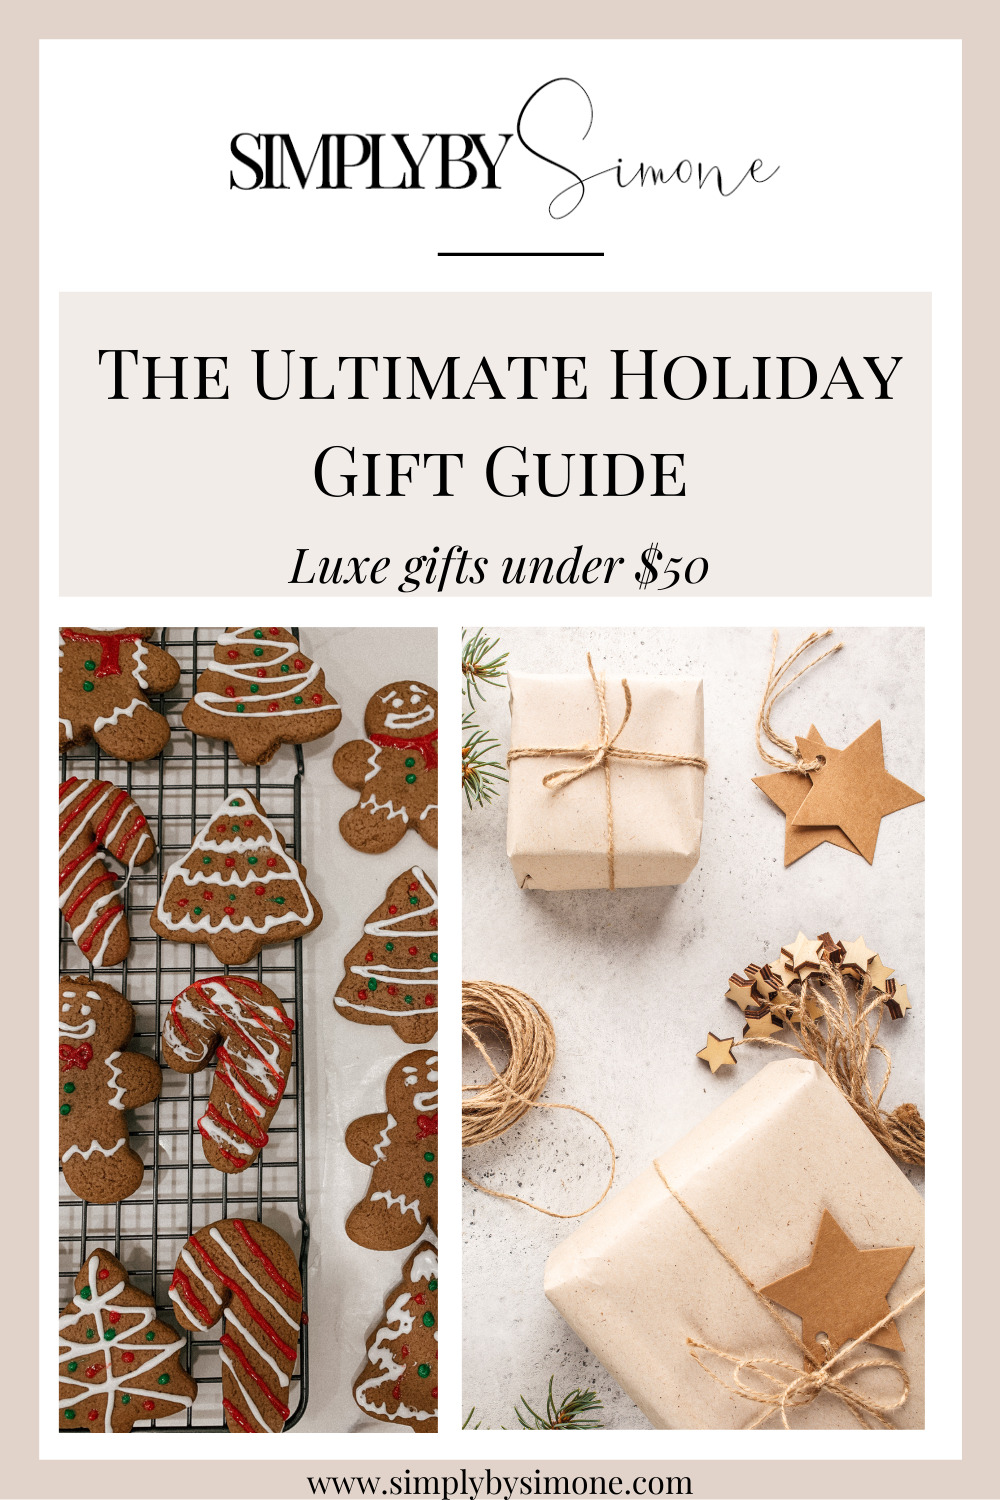 https://simplybysimone.com/wp-content/uploads/2020/11/The-Ultimate-Holiday-Gift-Guide-All-Gifts-Under-50-Simply-by-Simone-1.jpg